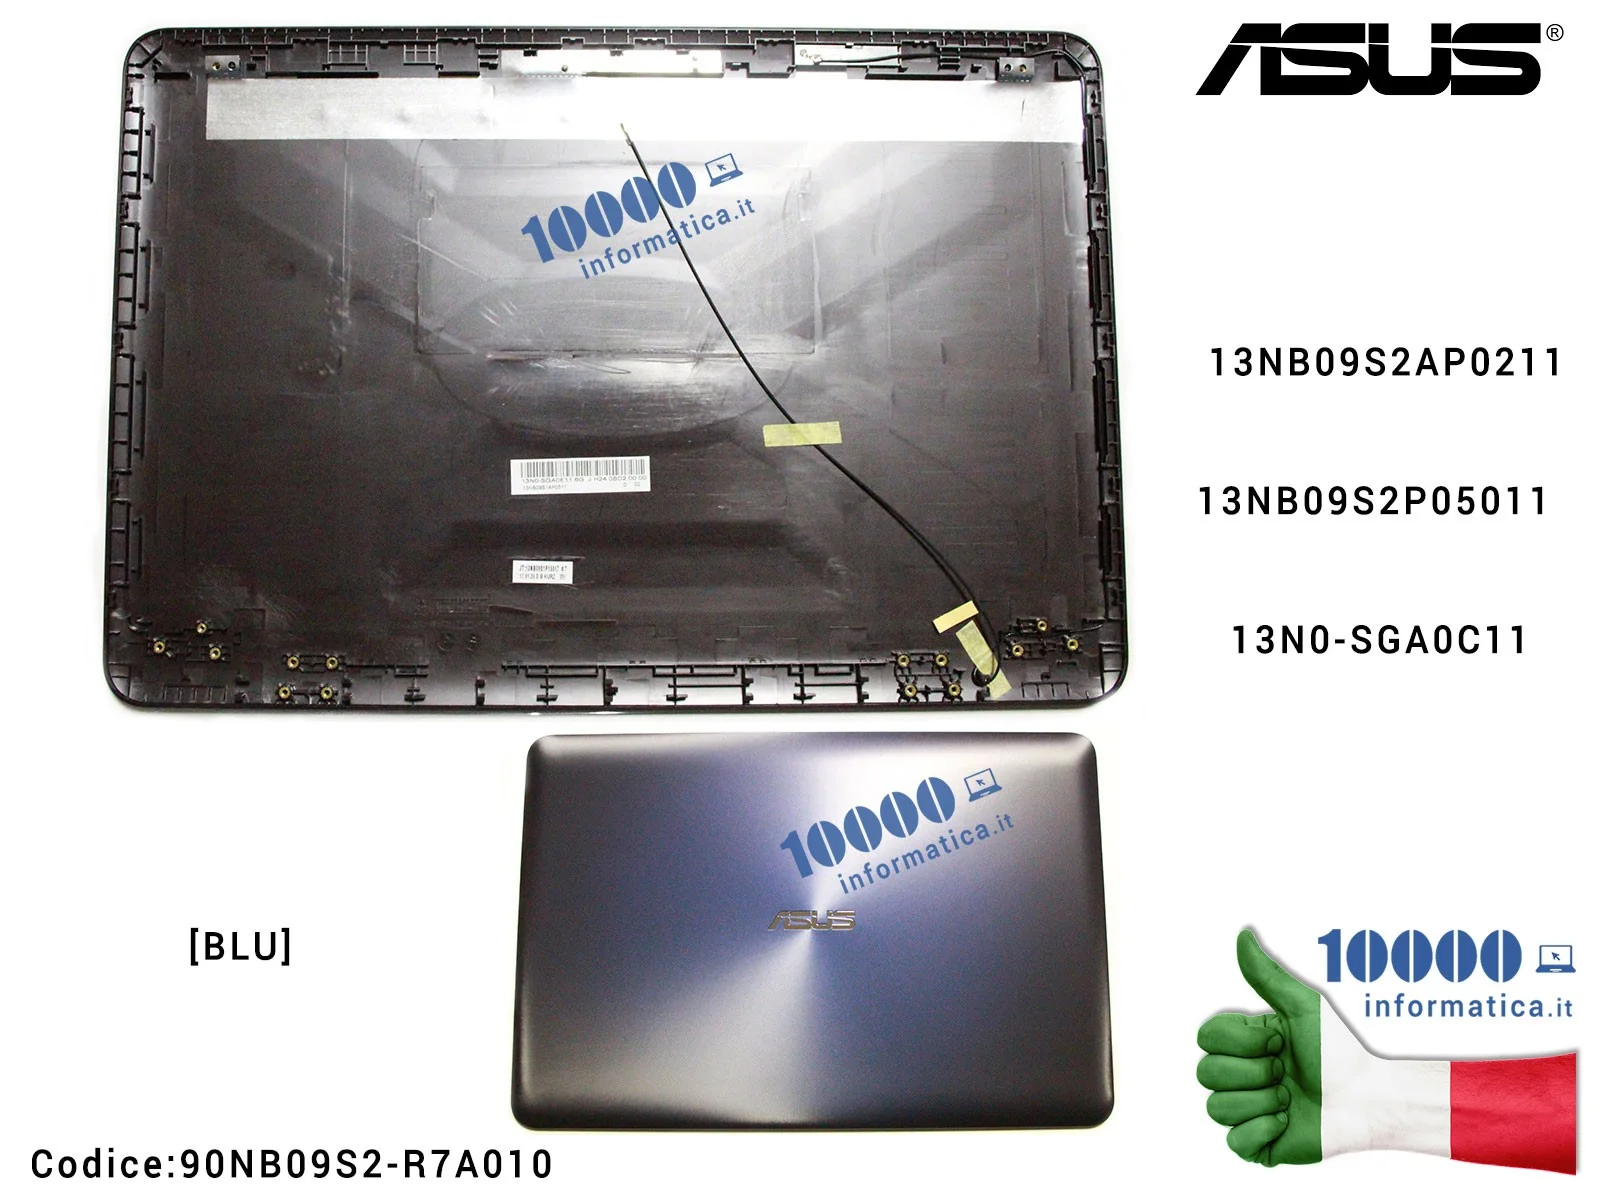 90NB09S2-R7A010 Cover LCD ASUS VivoBook X556 (NAVY BLUE) X556U X556UA X556UB X556UF F556 F556U F556UA F556UB 13NB09S2AP0211 1...